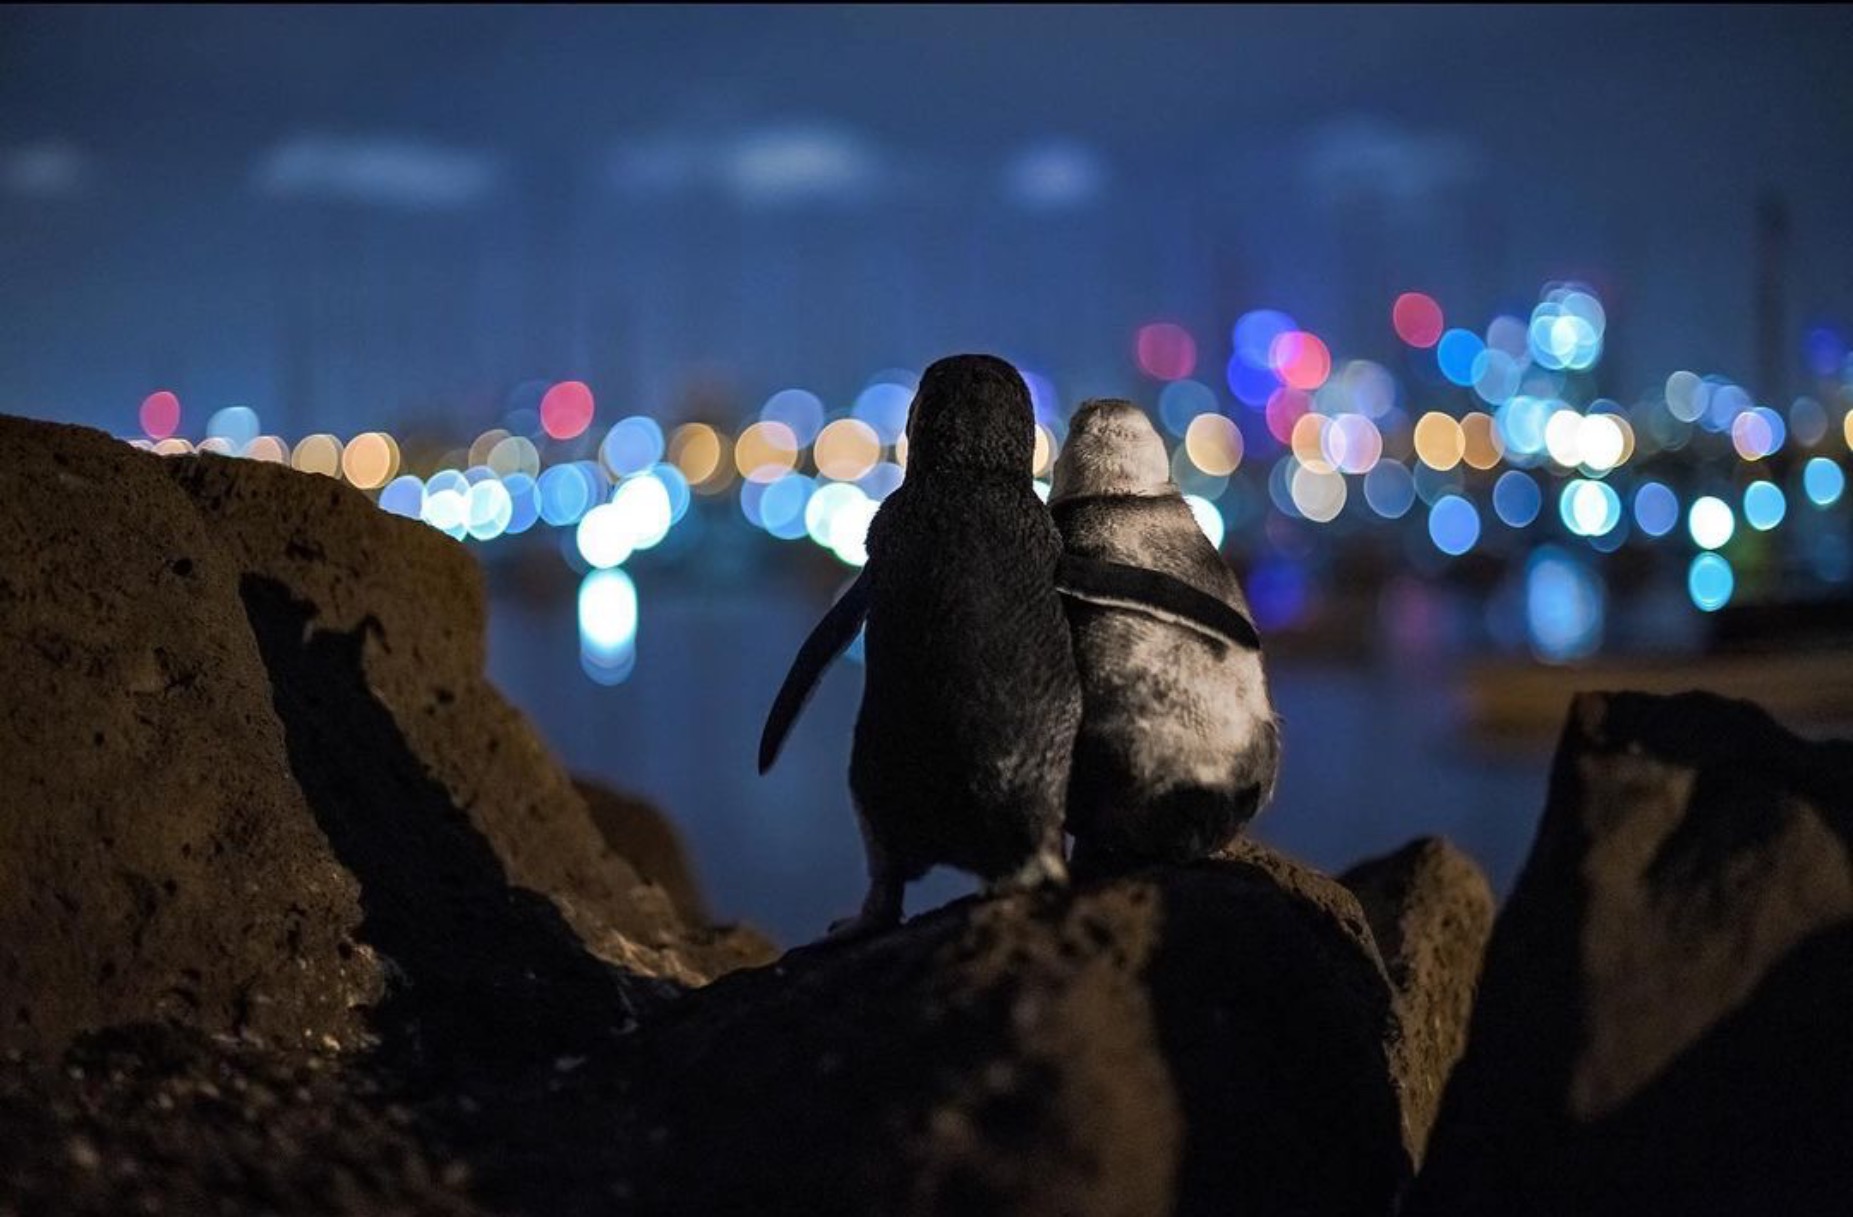 “These two Fairy penguins poised upon a rock overlooking the Melbourne skyline were standing there for hours, flipper in flipper, watching the sparkling lights of the skyline and ocean,”